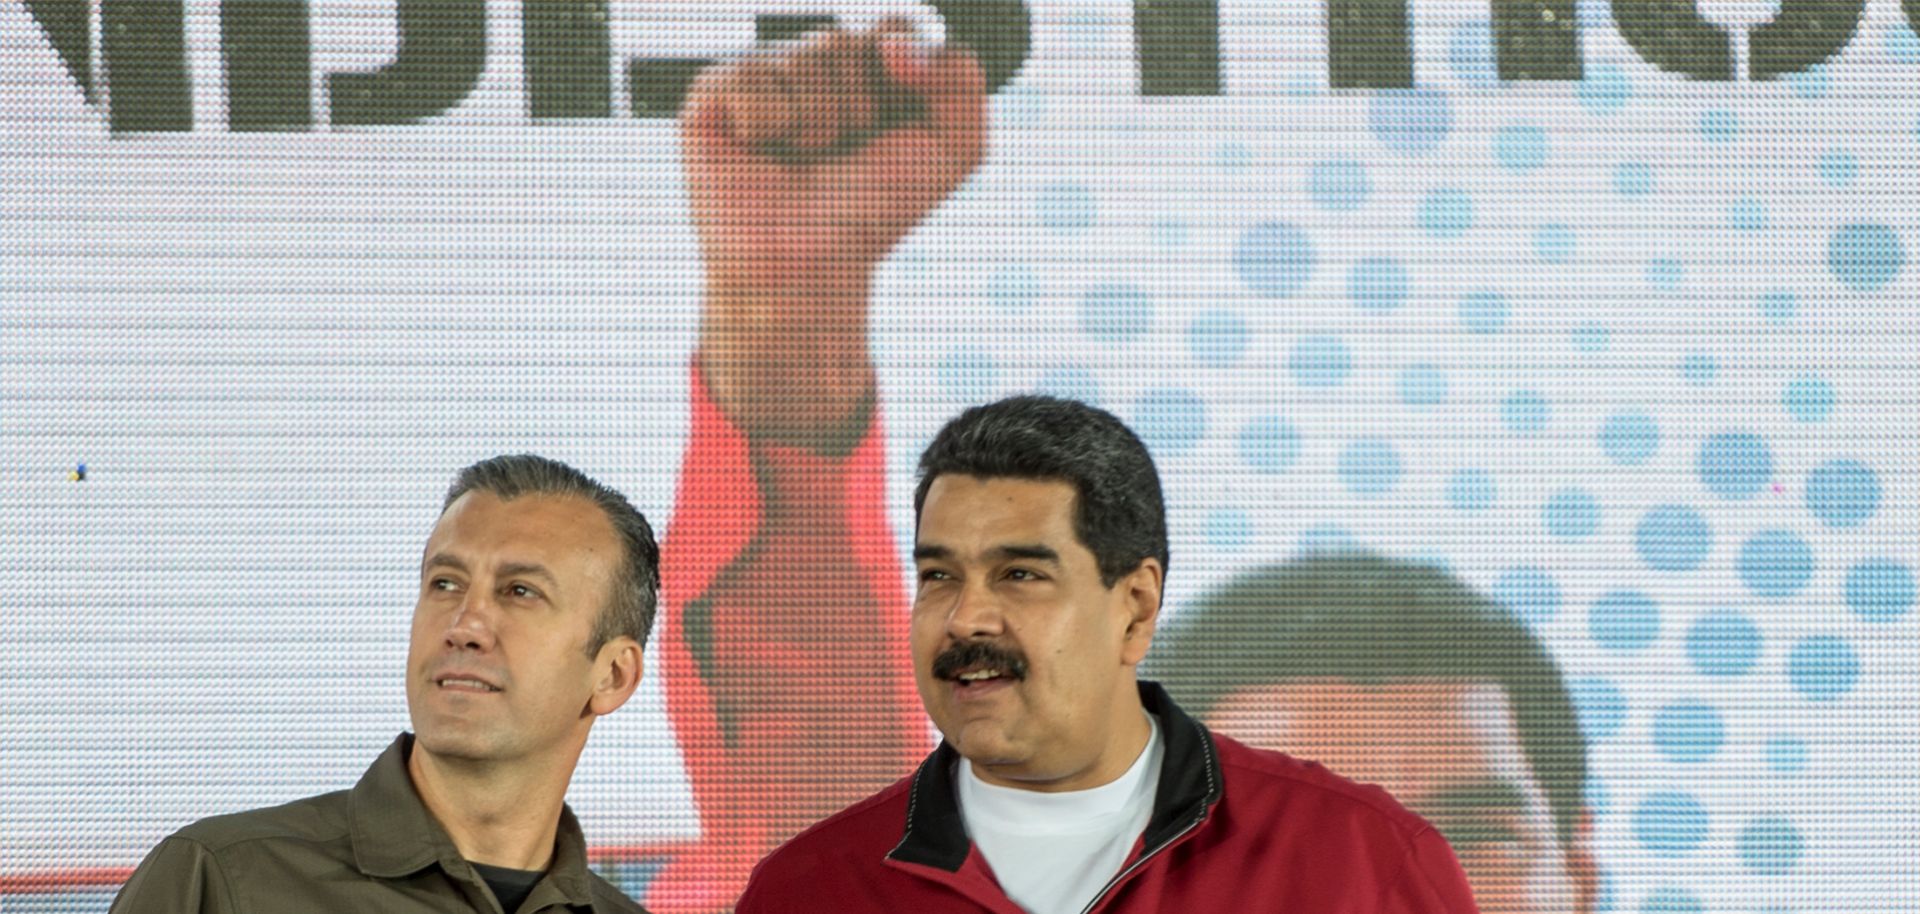 Links to the narcotics trade in the Venezuelan ruling class